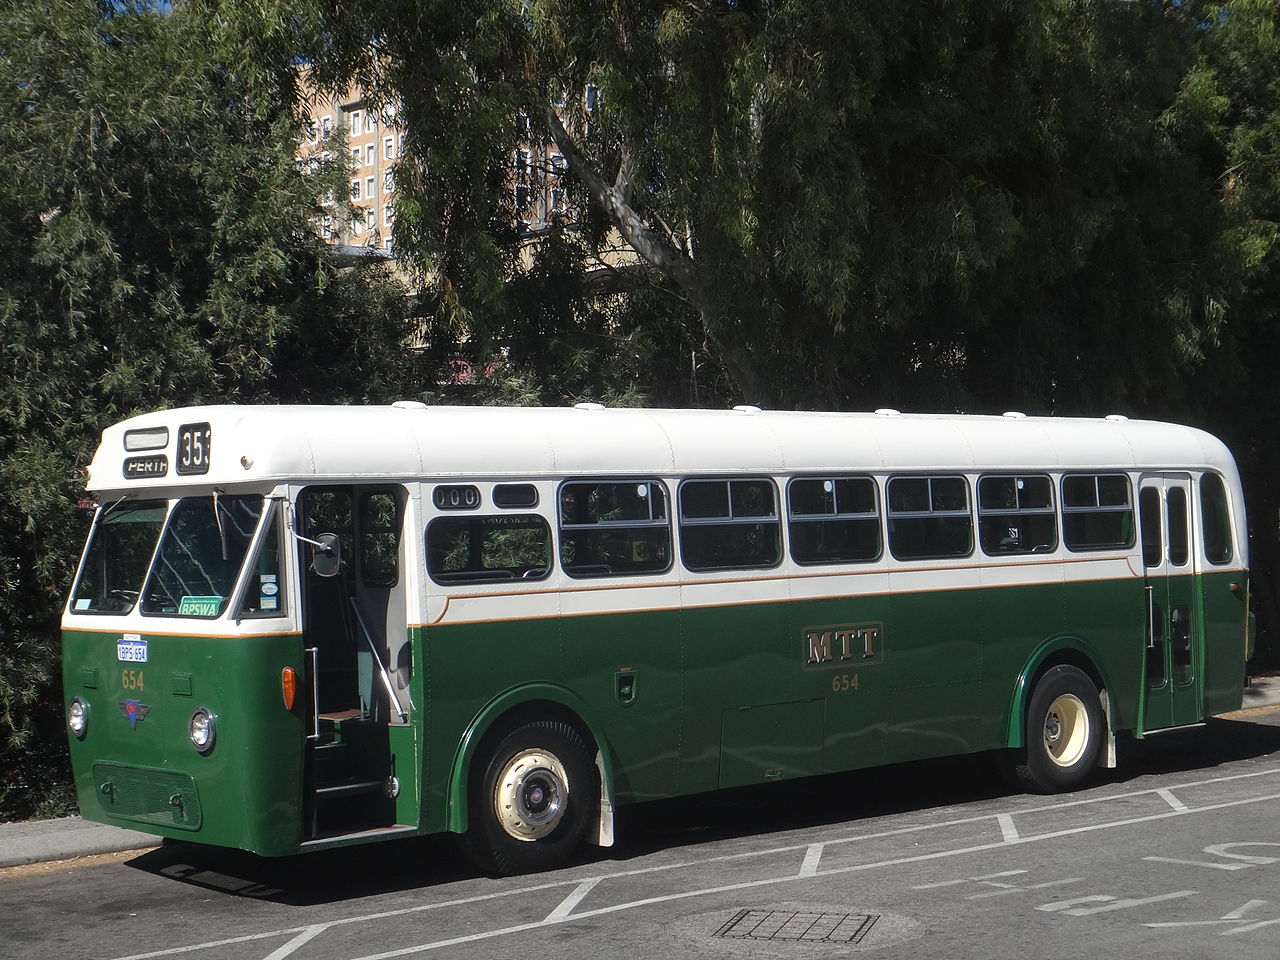 A bus from the 1950s in a museum